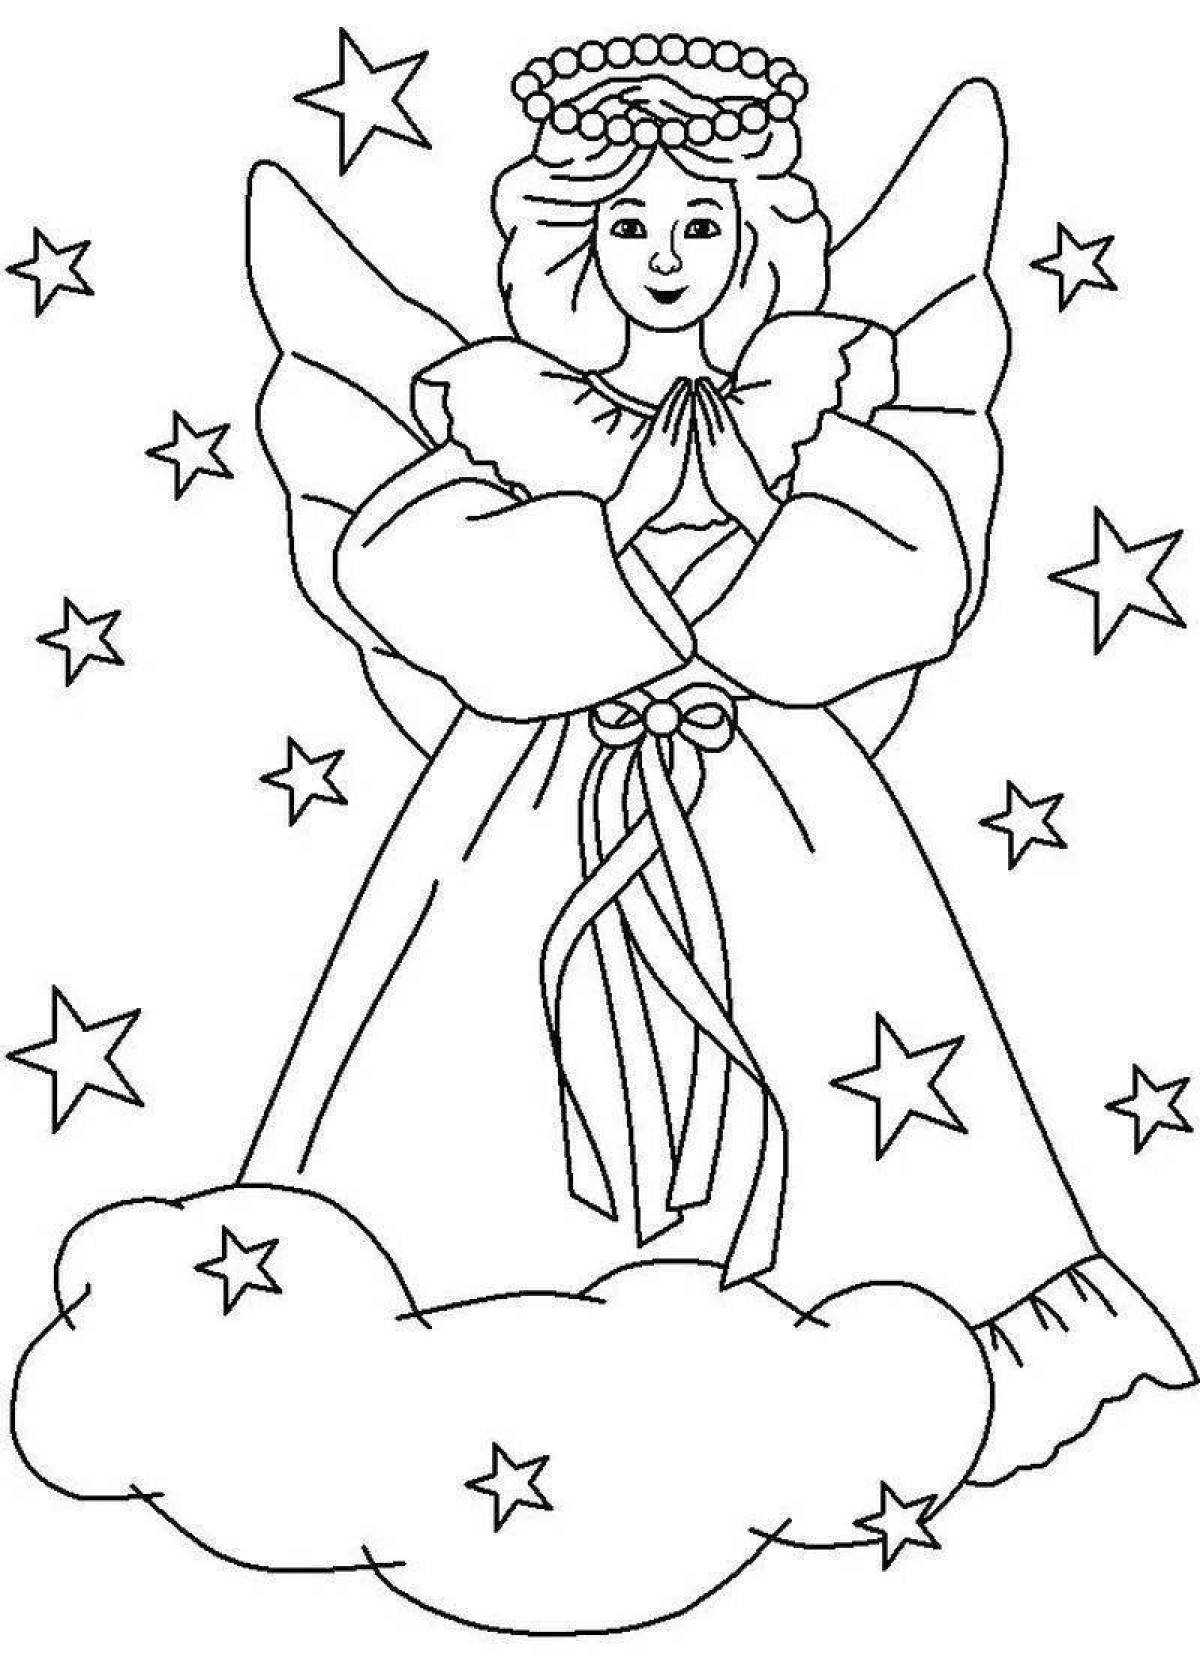 Adorable Christmas coloring book for 4-5 year olds